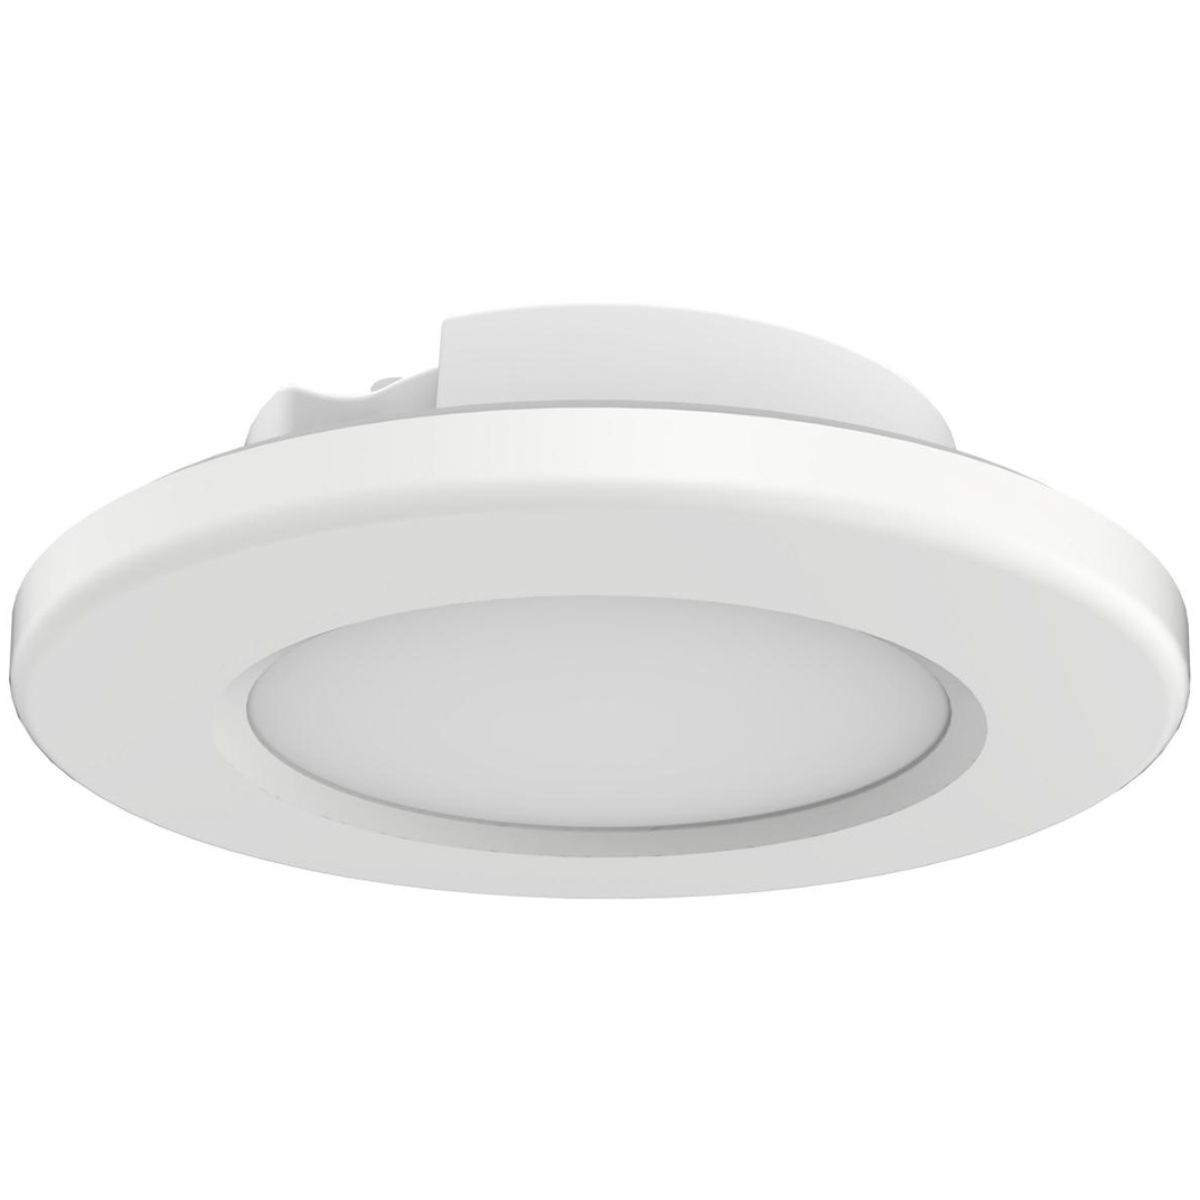 4 In. LED Disk / Surface Mount Light 3000K White Finish Contractor Pack Of 6 - Bees Lighting